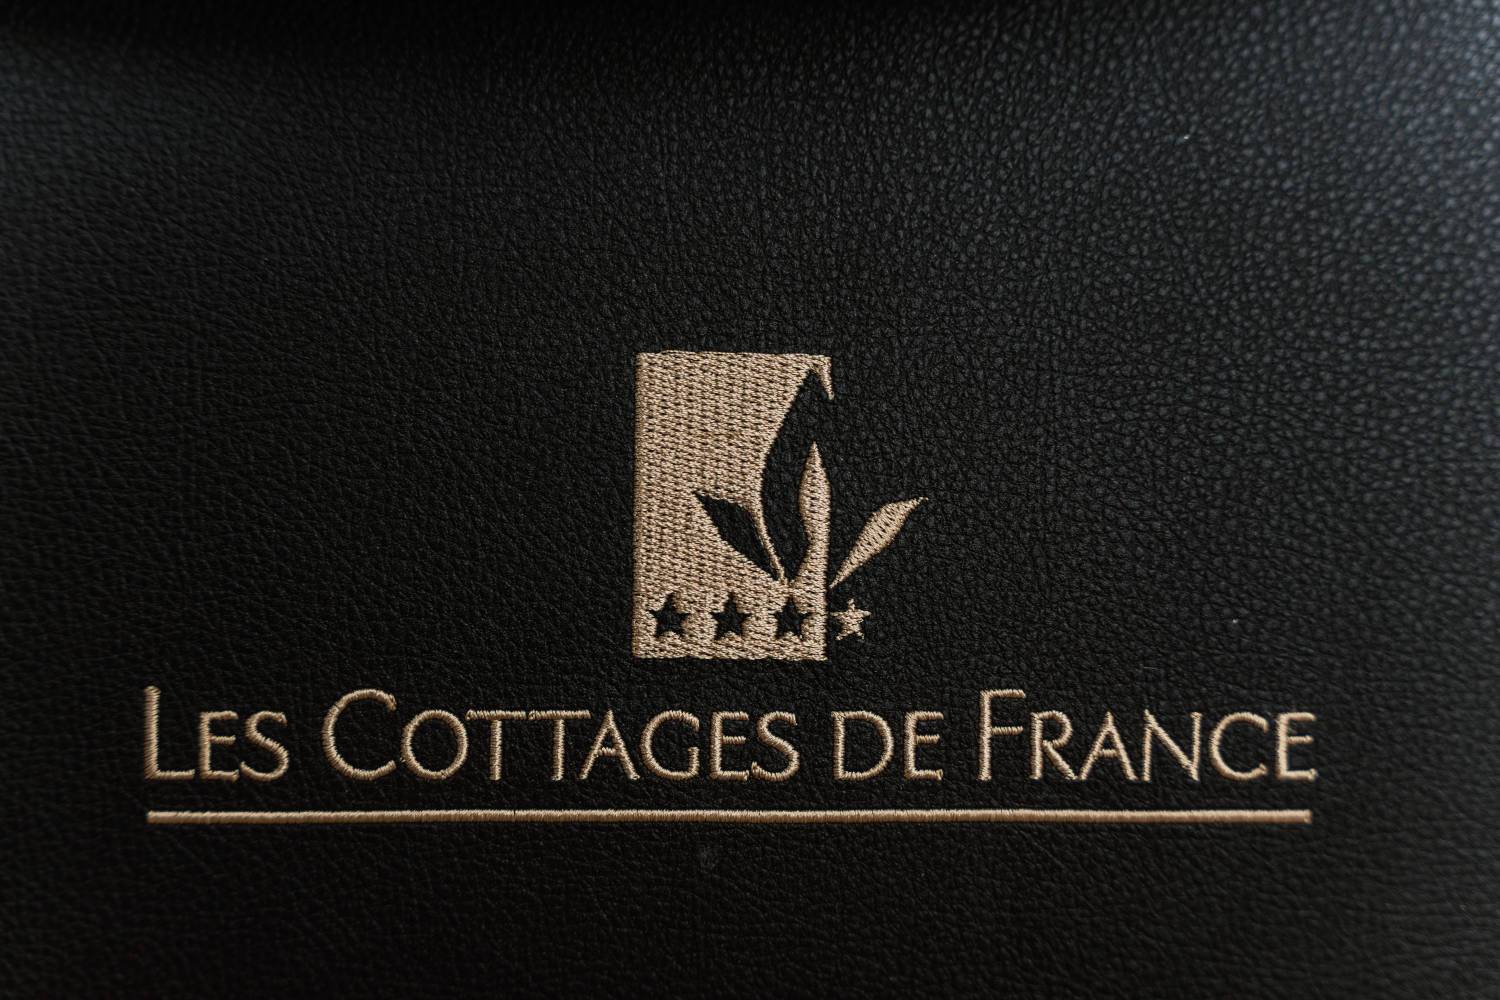 Les Cottages de France | Les Cottages de France, hotel near CDG airport and Villepinte